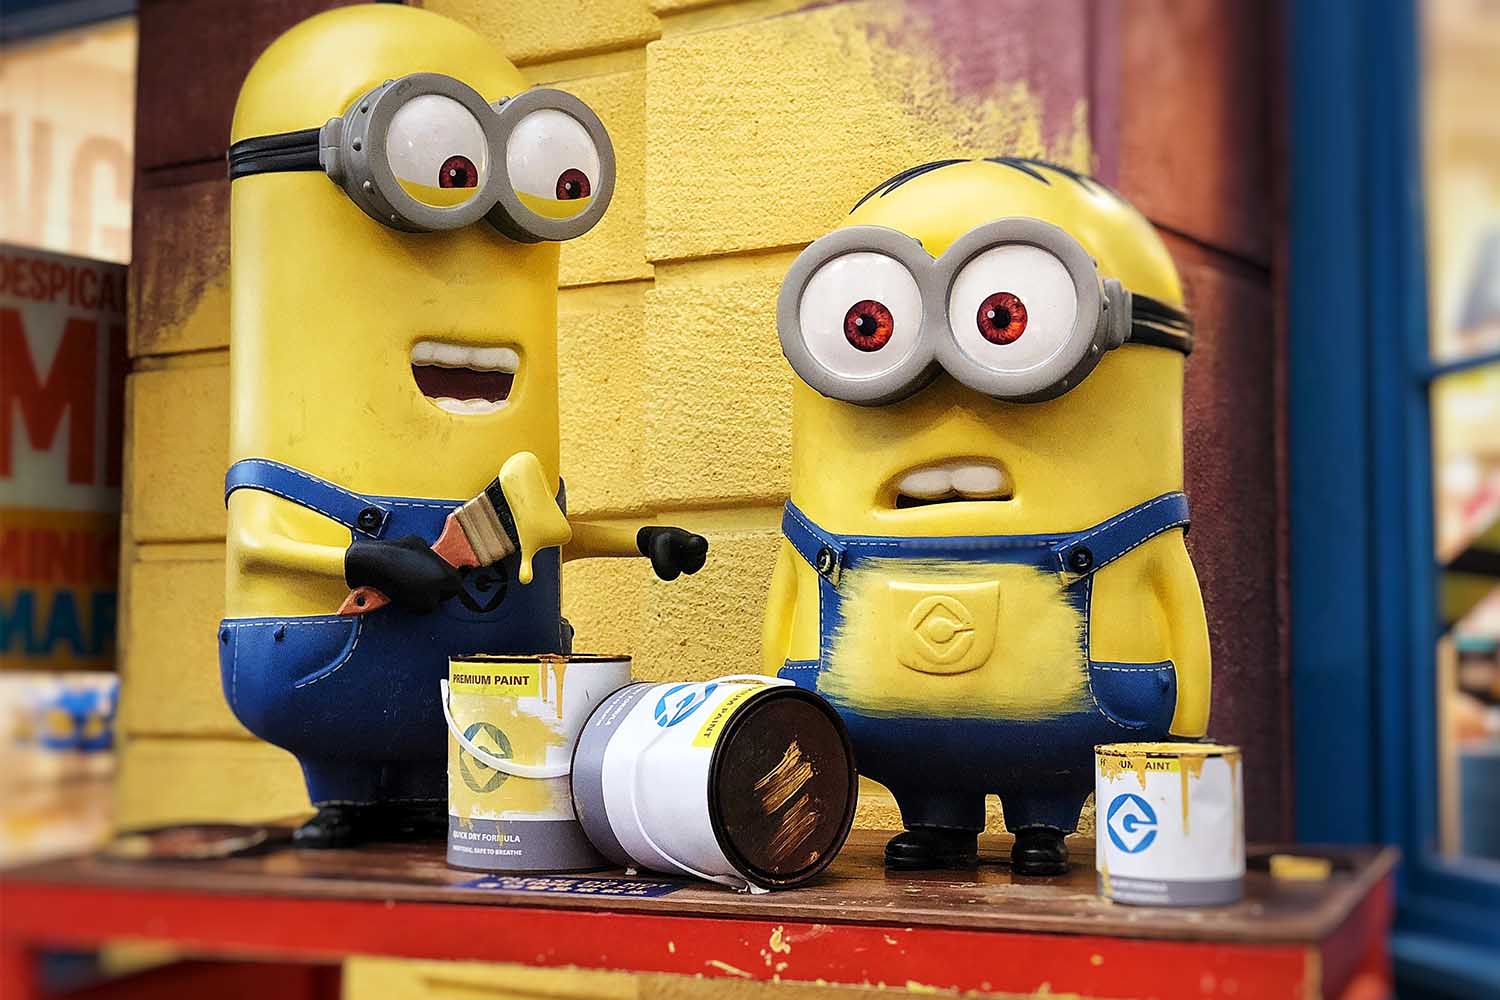 What's the deal with kids in suits seeing Minions: Rise of Gru?